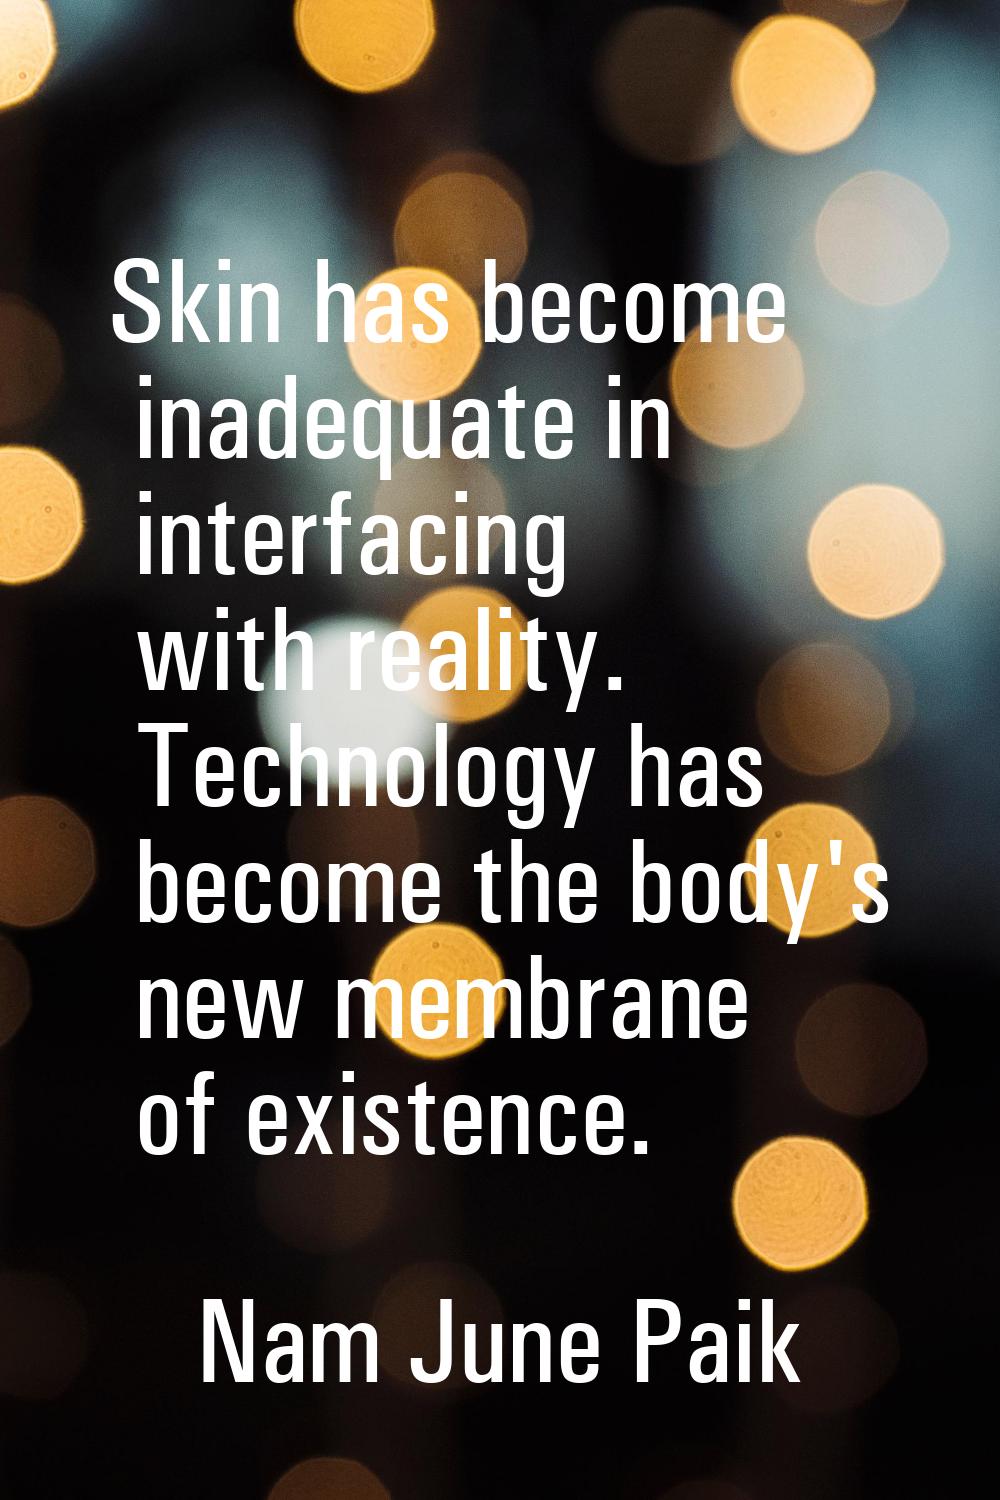 Skin has become inadequate in interfacing with reality. Technology has become the body's new membra